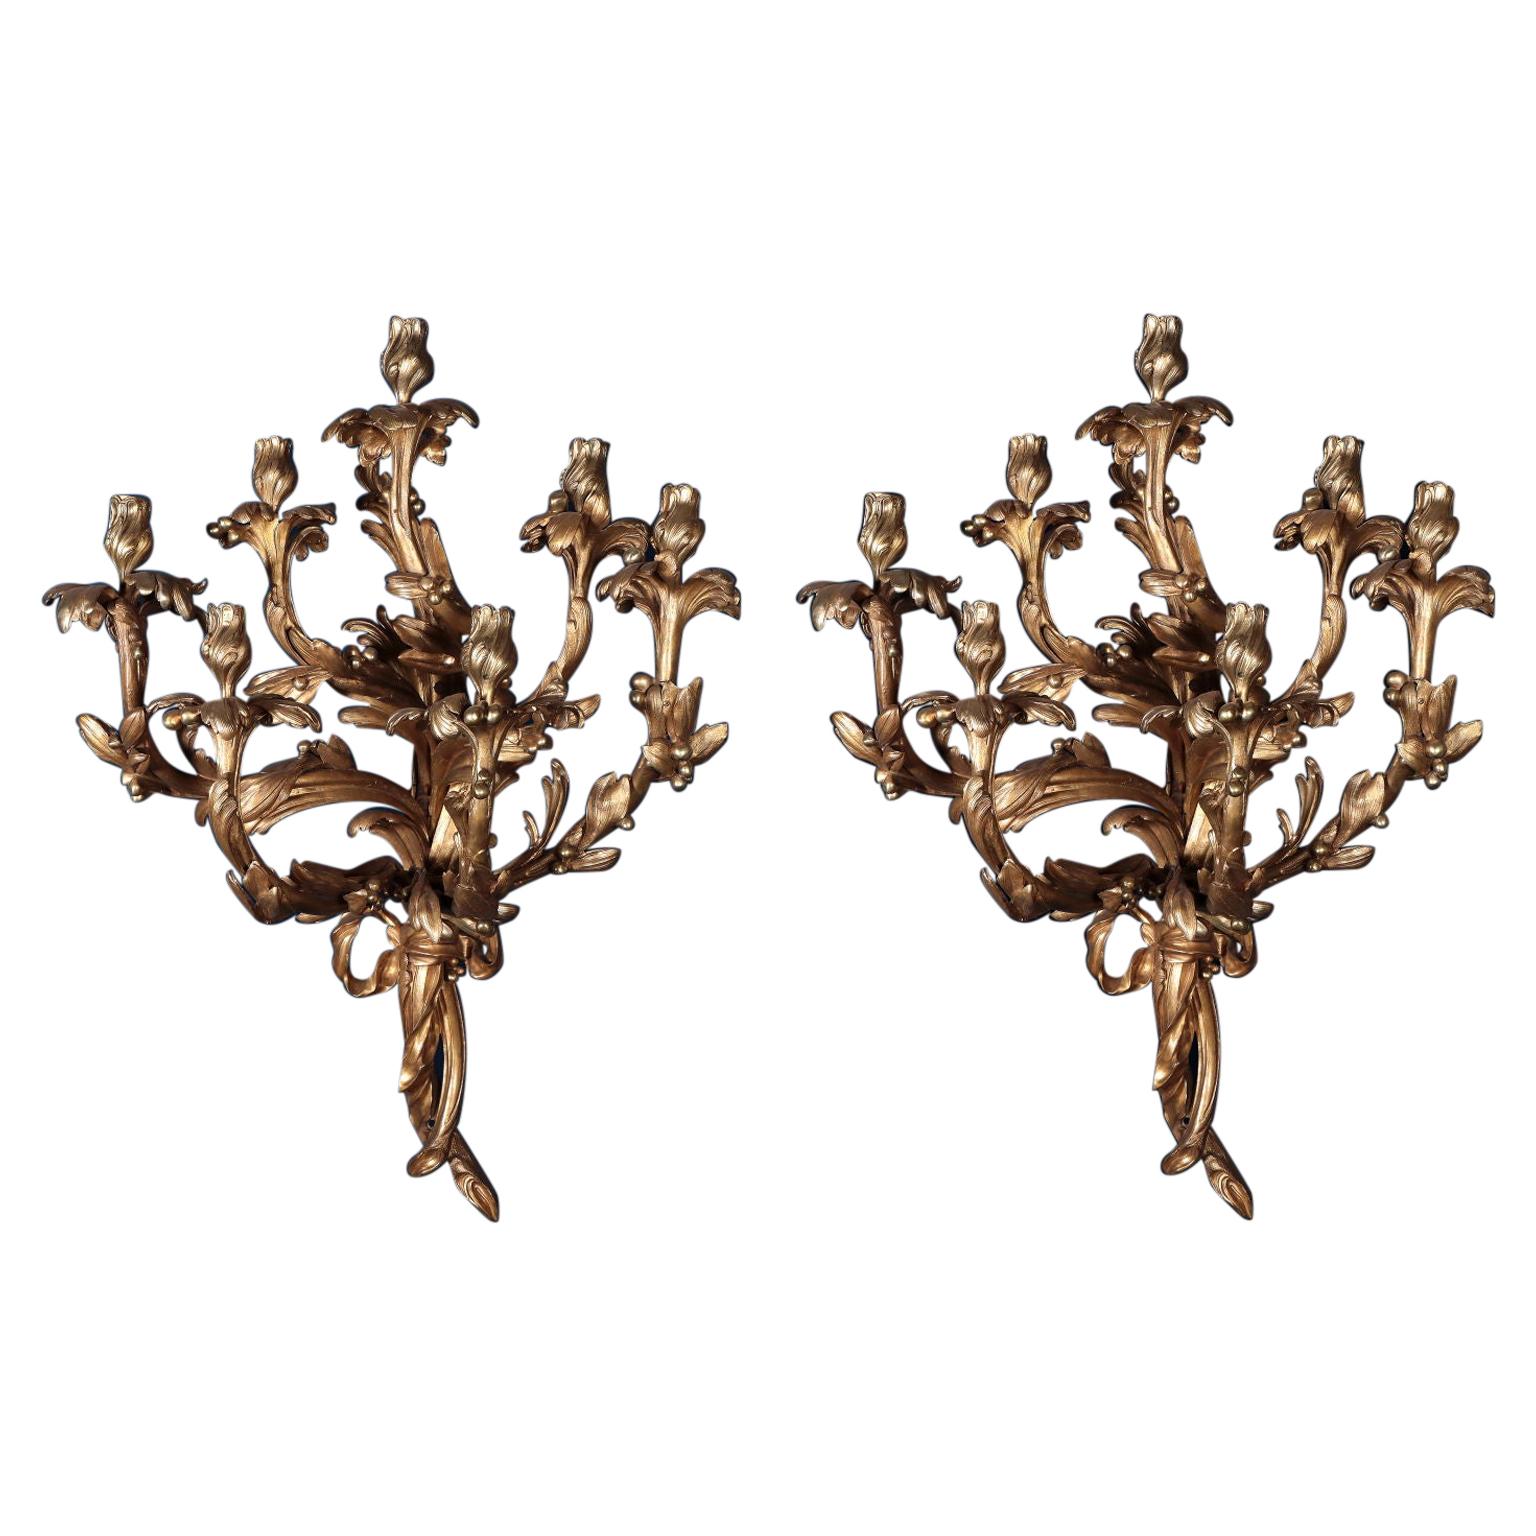 Pair of Bronze Sconces with Seven Branches